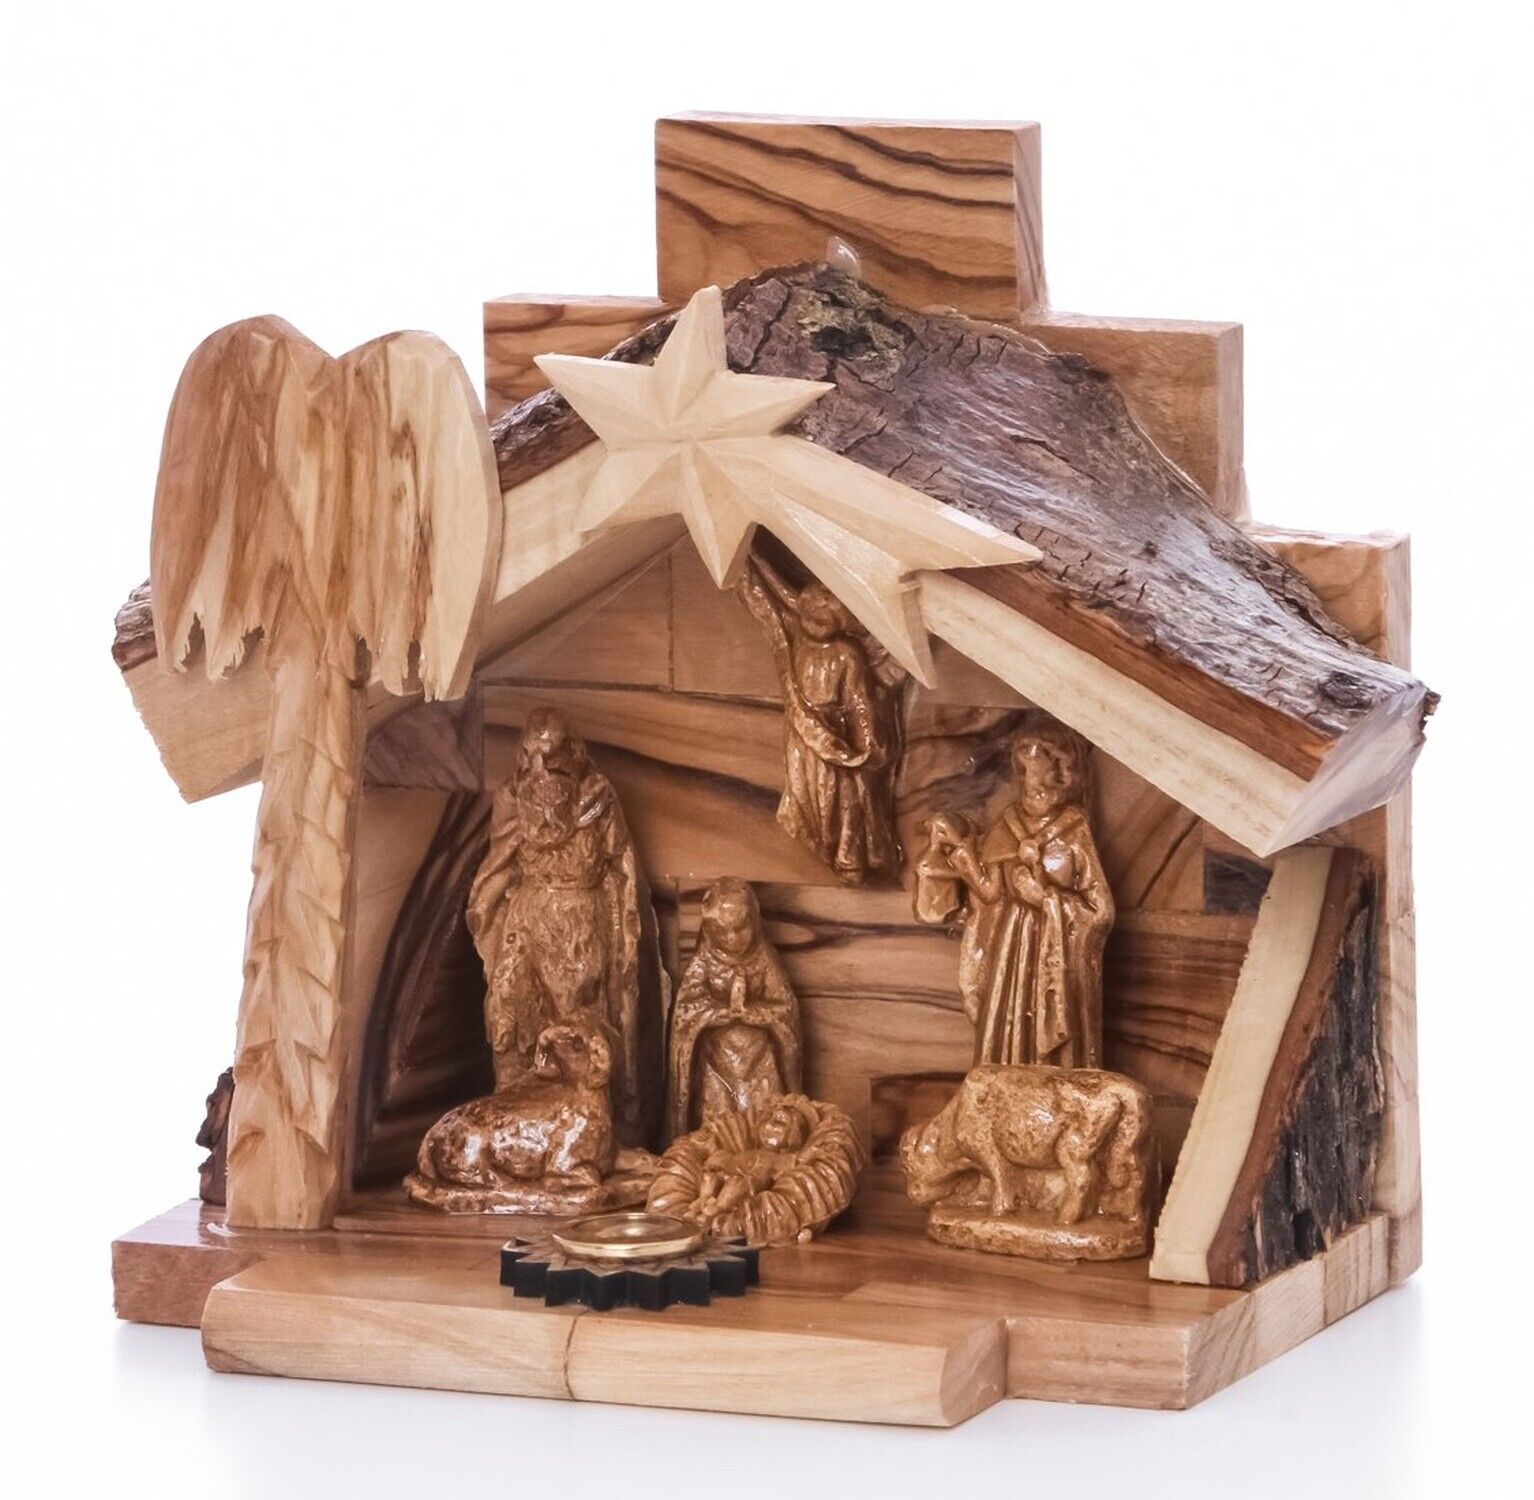 Zuluf Small Hand Carved Nativity Set Scene with Bark Roof Made in Bethlehem |...